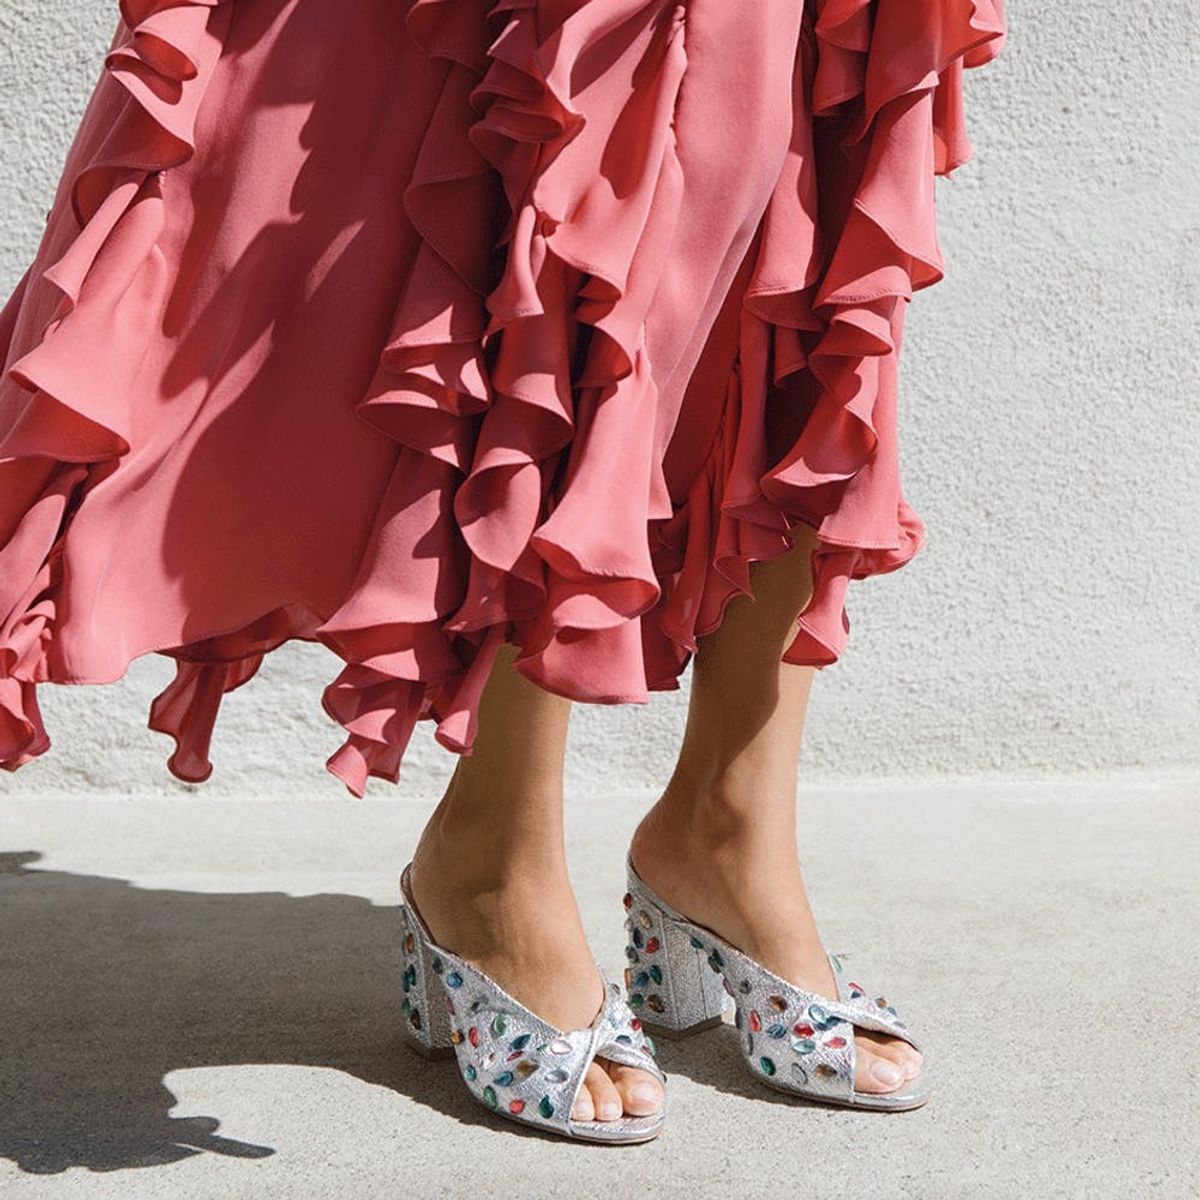 18 Non-Traditional Shoe Options for Spring Brides